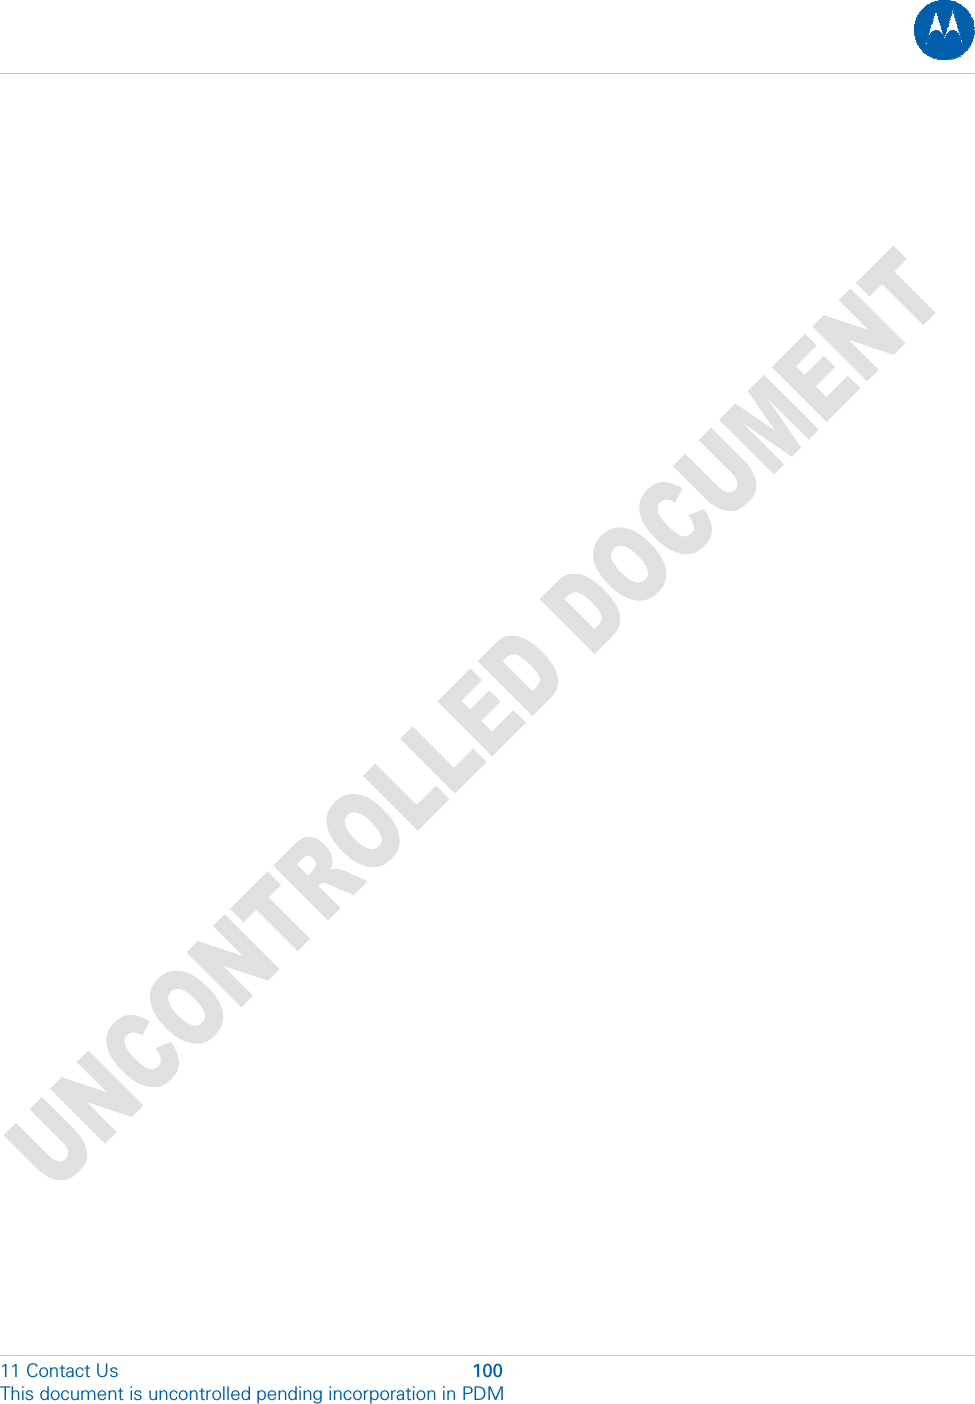   11 Contact Us  100 This document is uncontrolled pending incorporation in PDM  